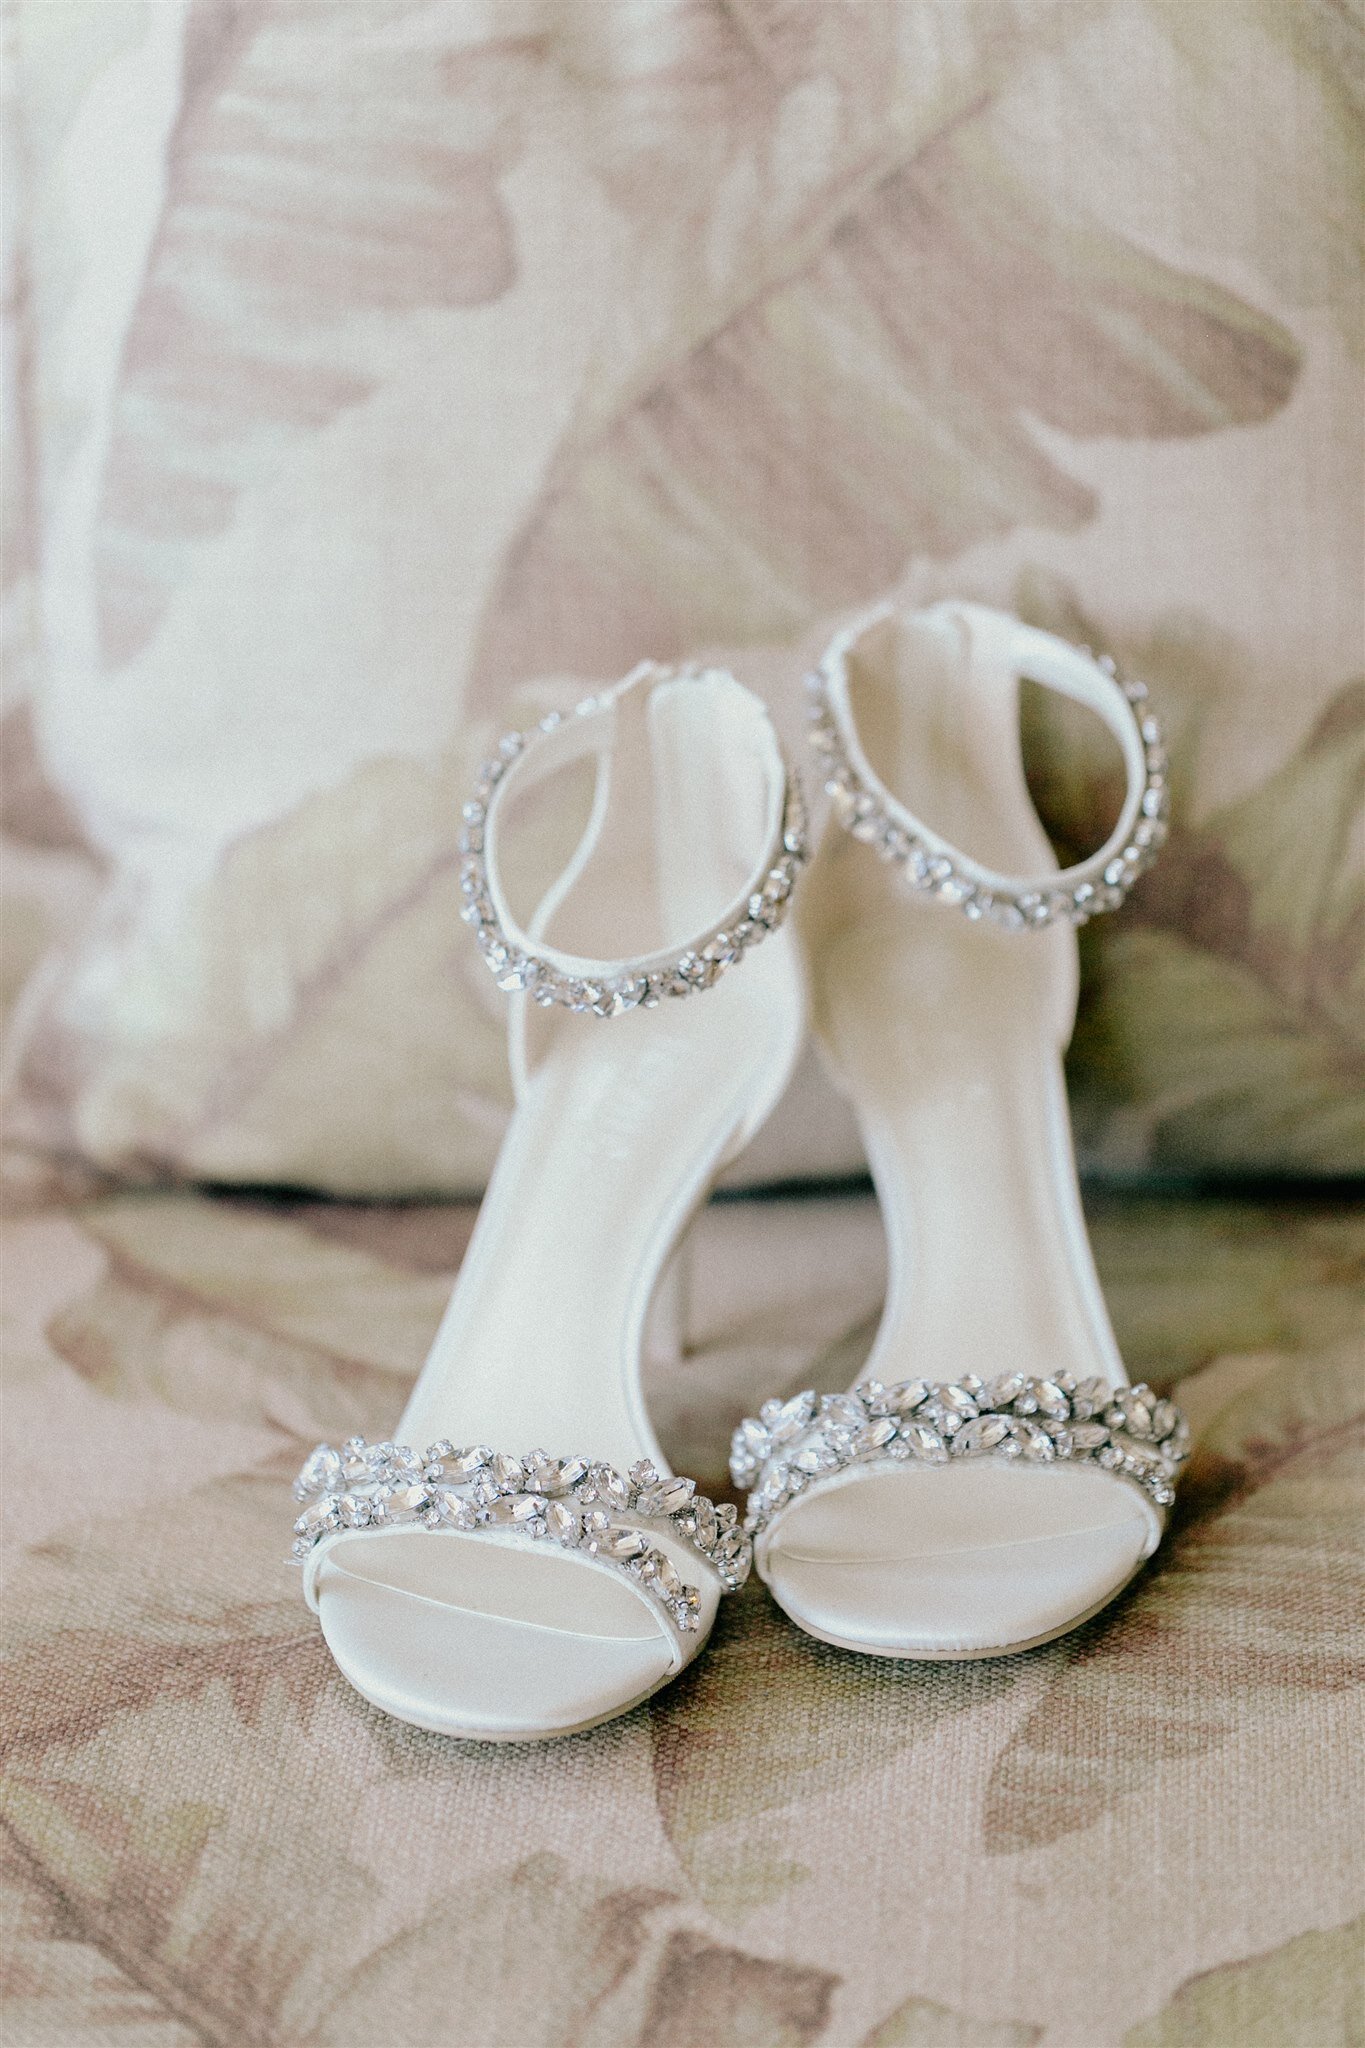 crystals-wedding-shoes-palm-leaves-print